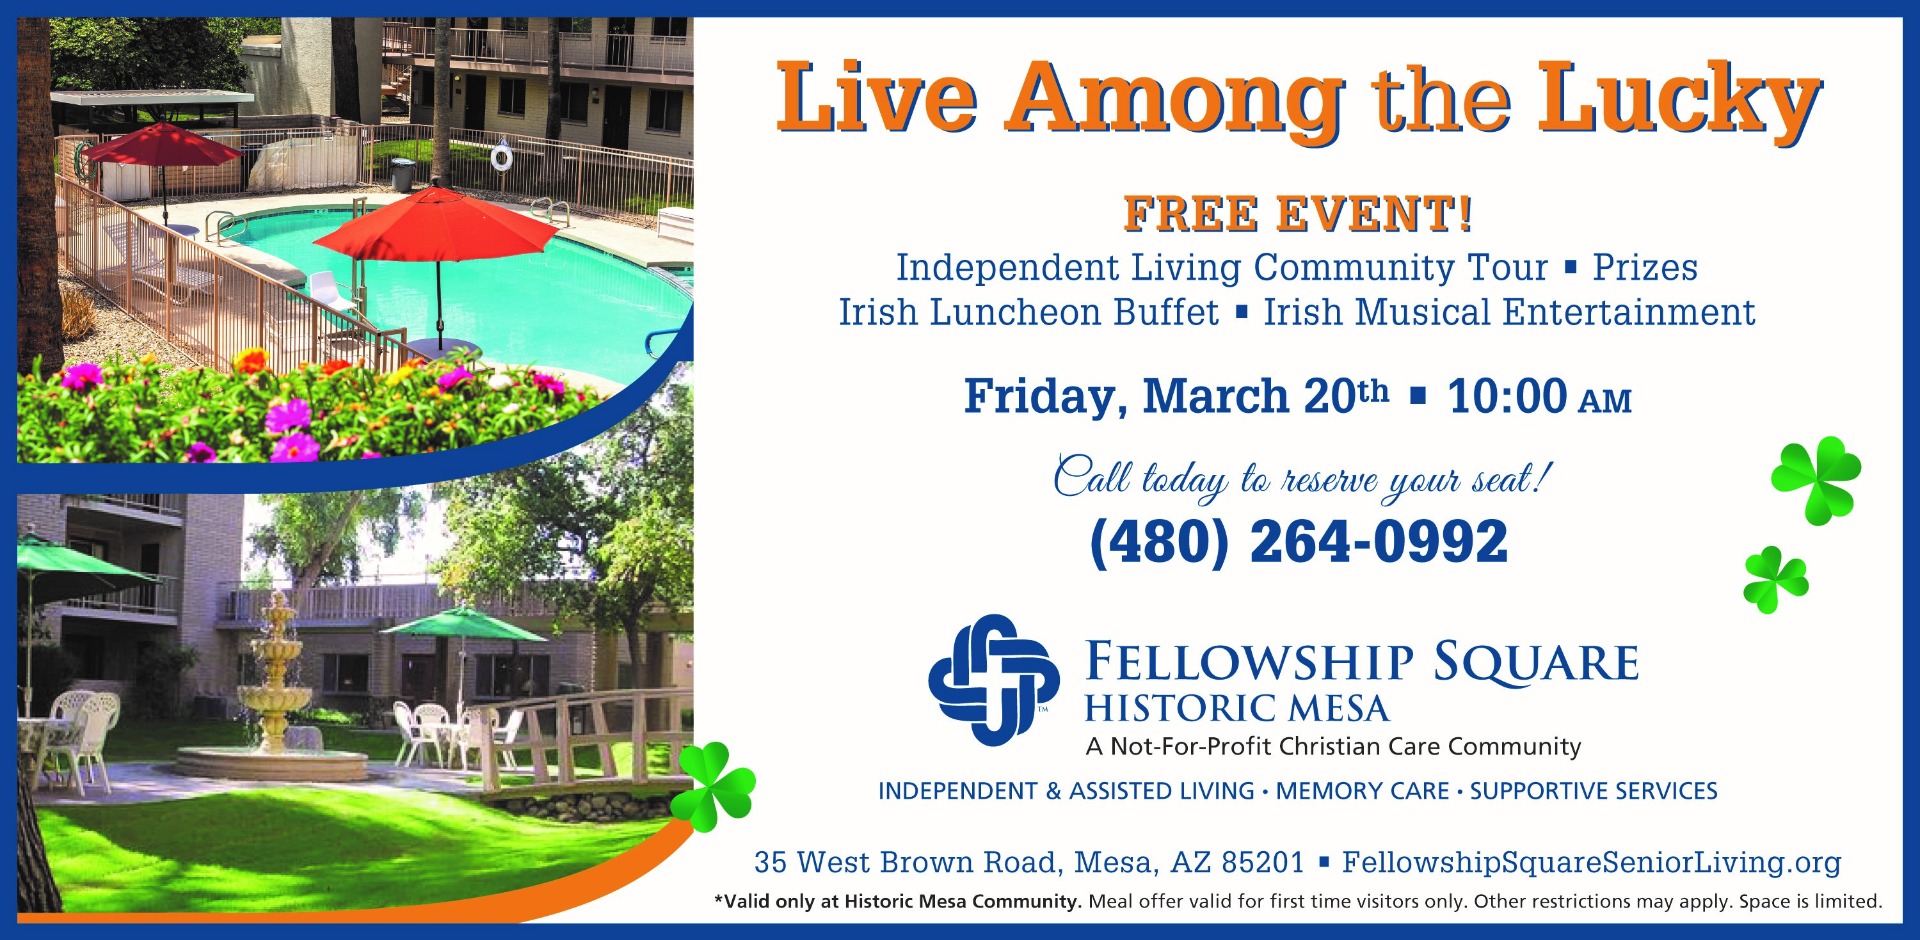 Flyer for independent living event at Fellowship Square Historic Mesa - Free to the community on March 20, 2020